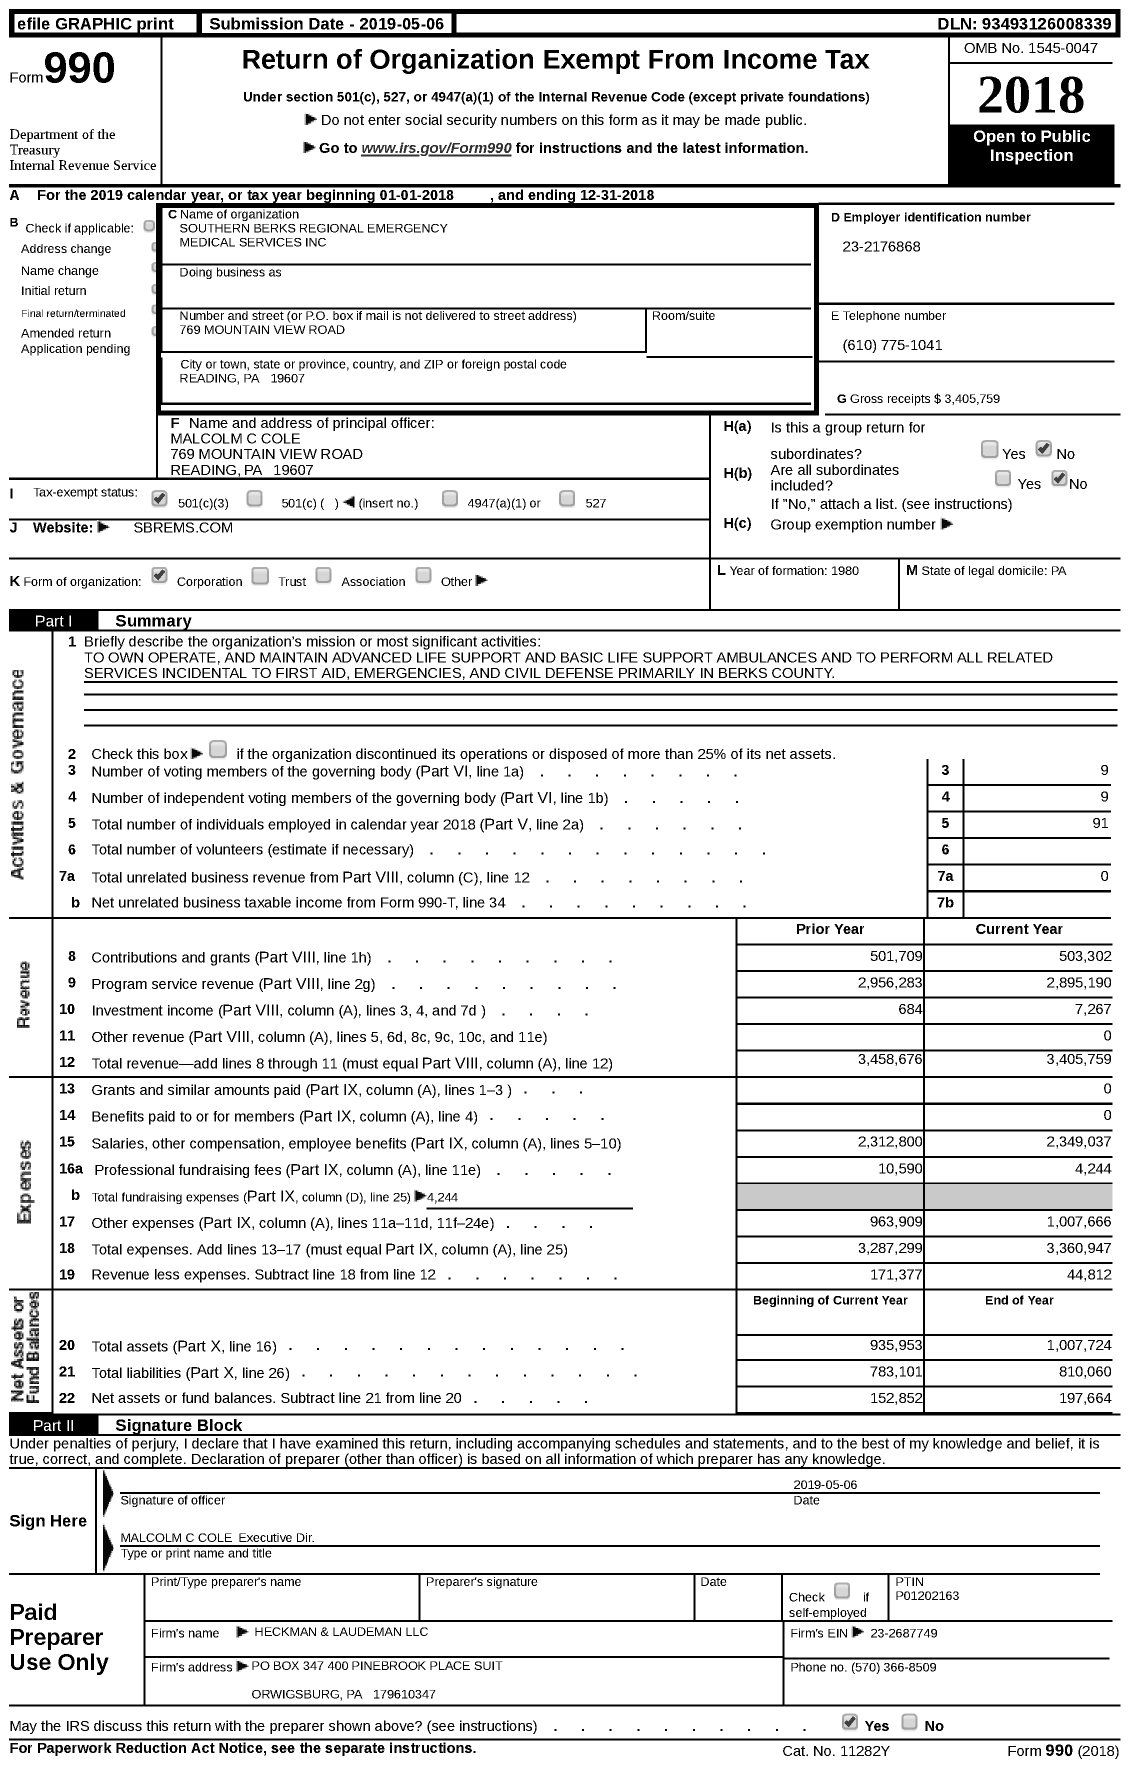 Image of first page of 2018 Form 990 for Southern Berks Regional Emergency Medical Services